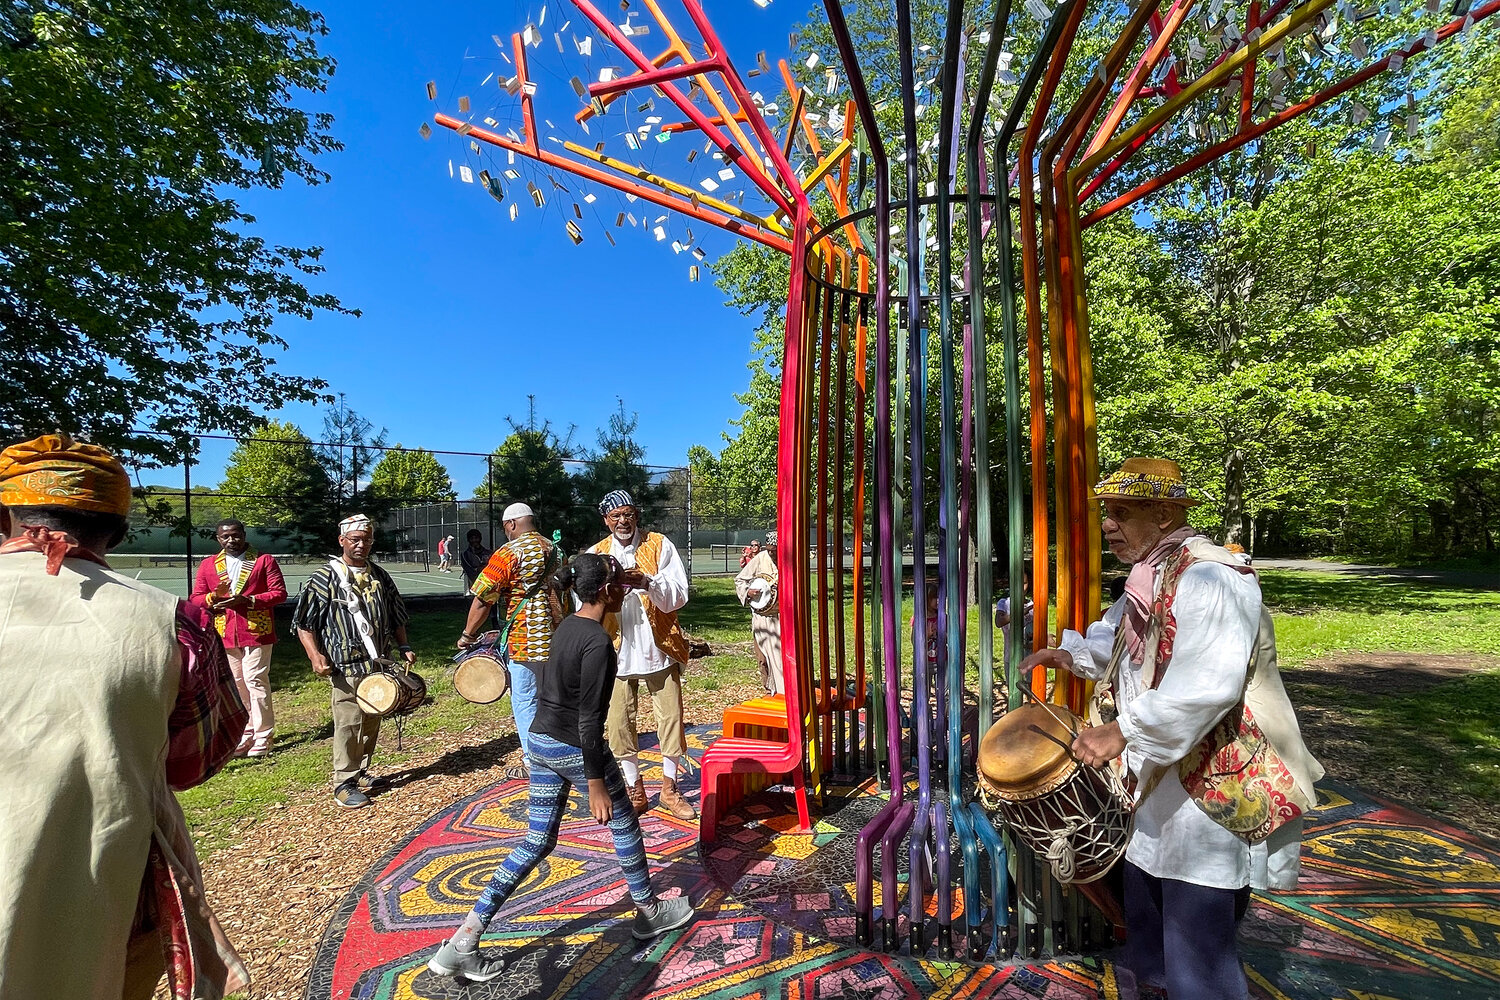 ‘Baobab: Tree of Life’ ribbon-cutting ceremony was on May 4. Now it is on display until 2024. Created by Tijay Mohammed, a Ghana-born artist, he uses the Baobab tree as the inspiration of his art piece in Van Cortlandt Park.